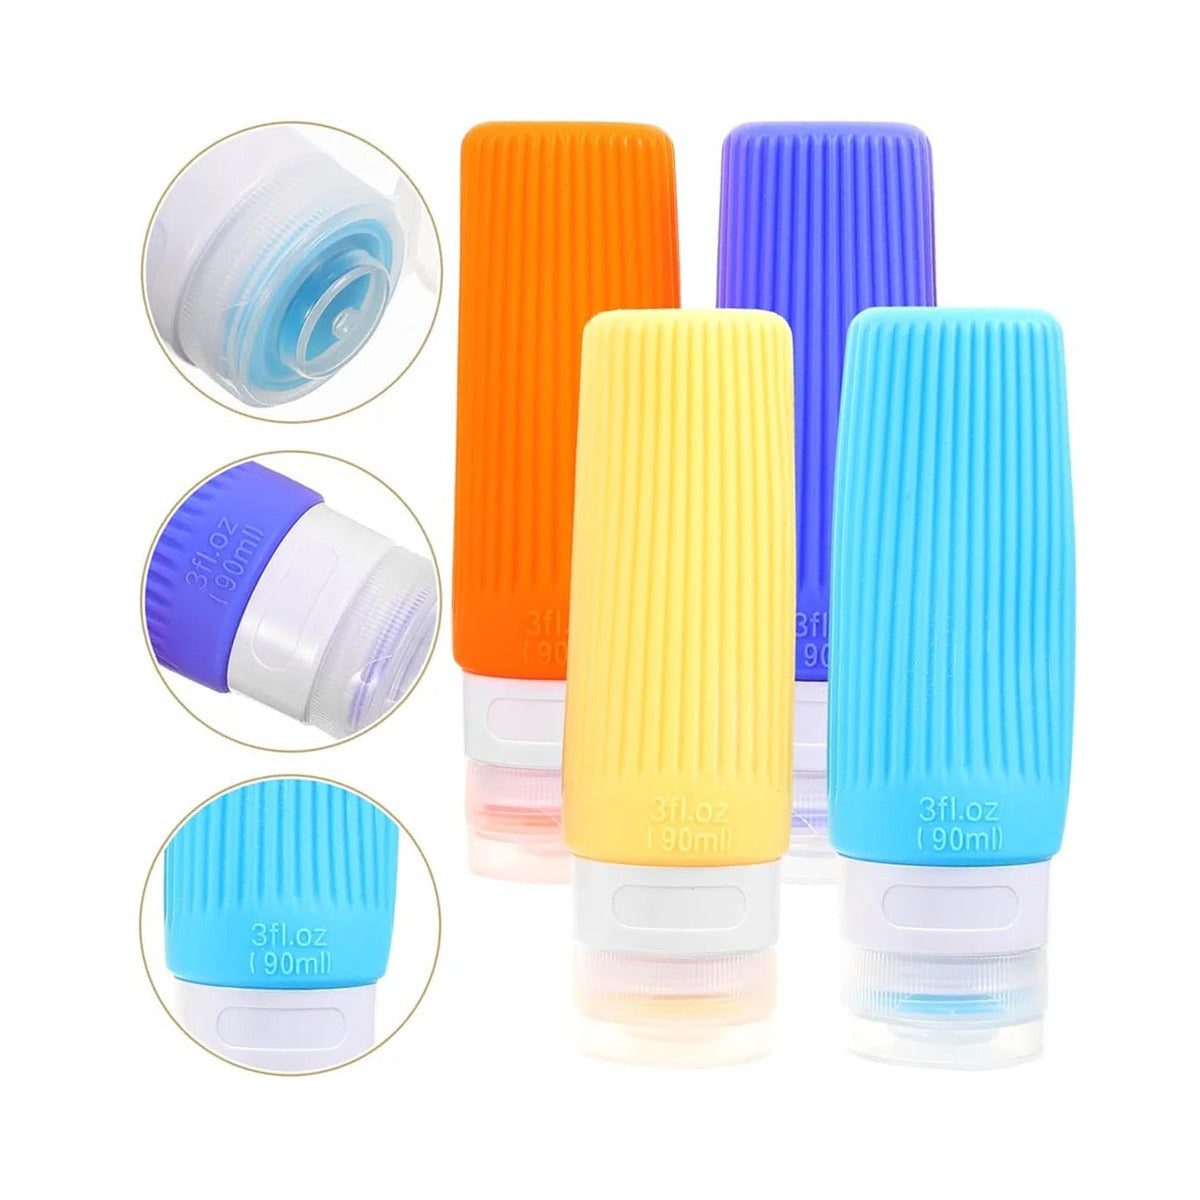 Parts of Travel Toiletry Bottle Set.